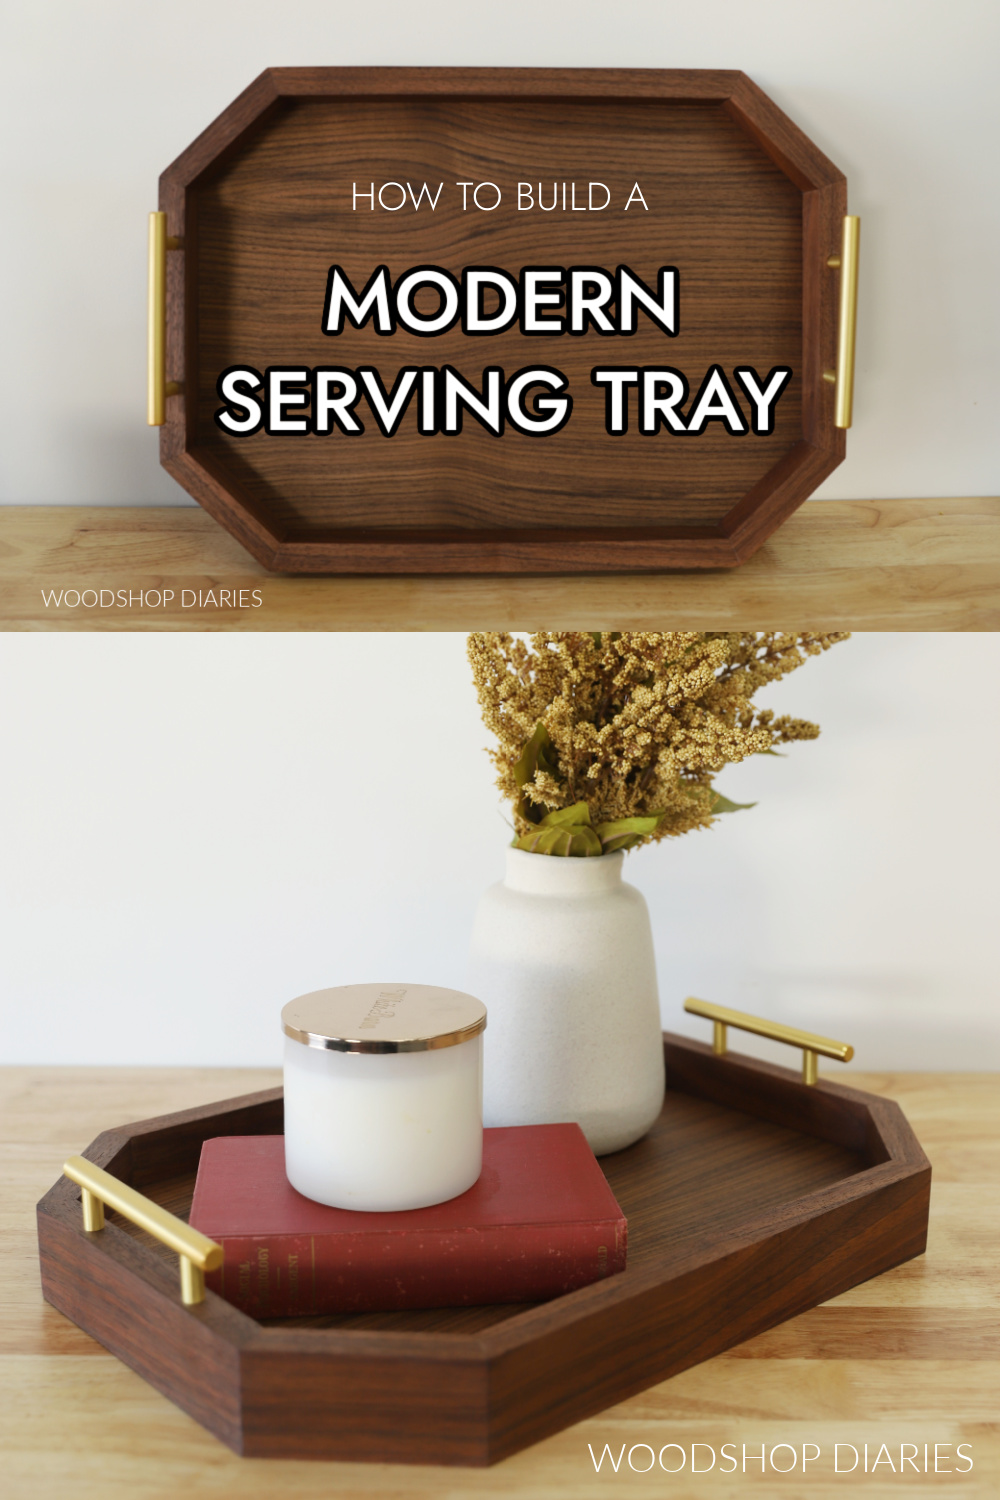 Pinterest collage image showing tray leaning against wall at top and decorated tray with vase on bottom with text "how to build a modern serving tray"